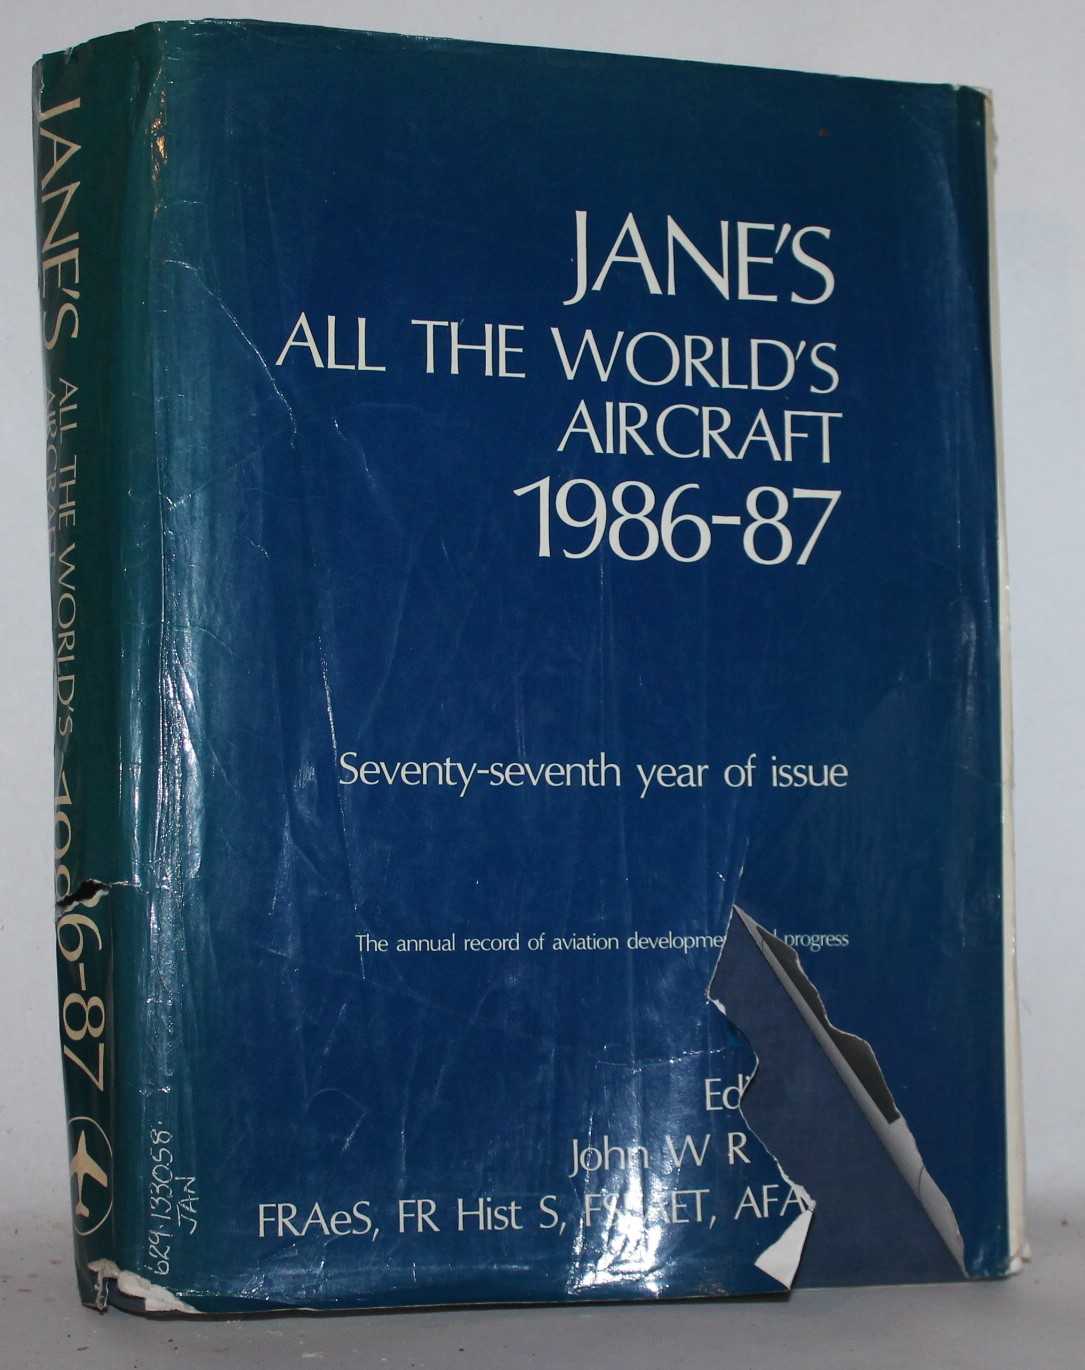 Jane's All the World's Aircraft 1986-87 - John W. R. Taylor (Compiled and Edited By)